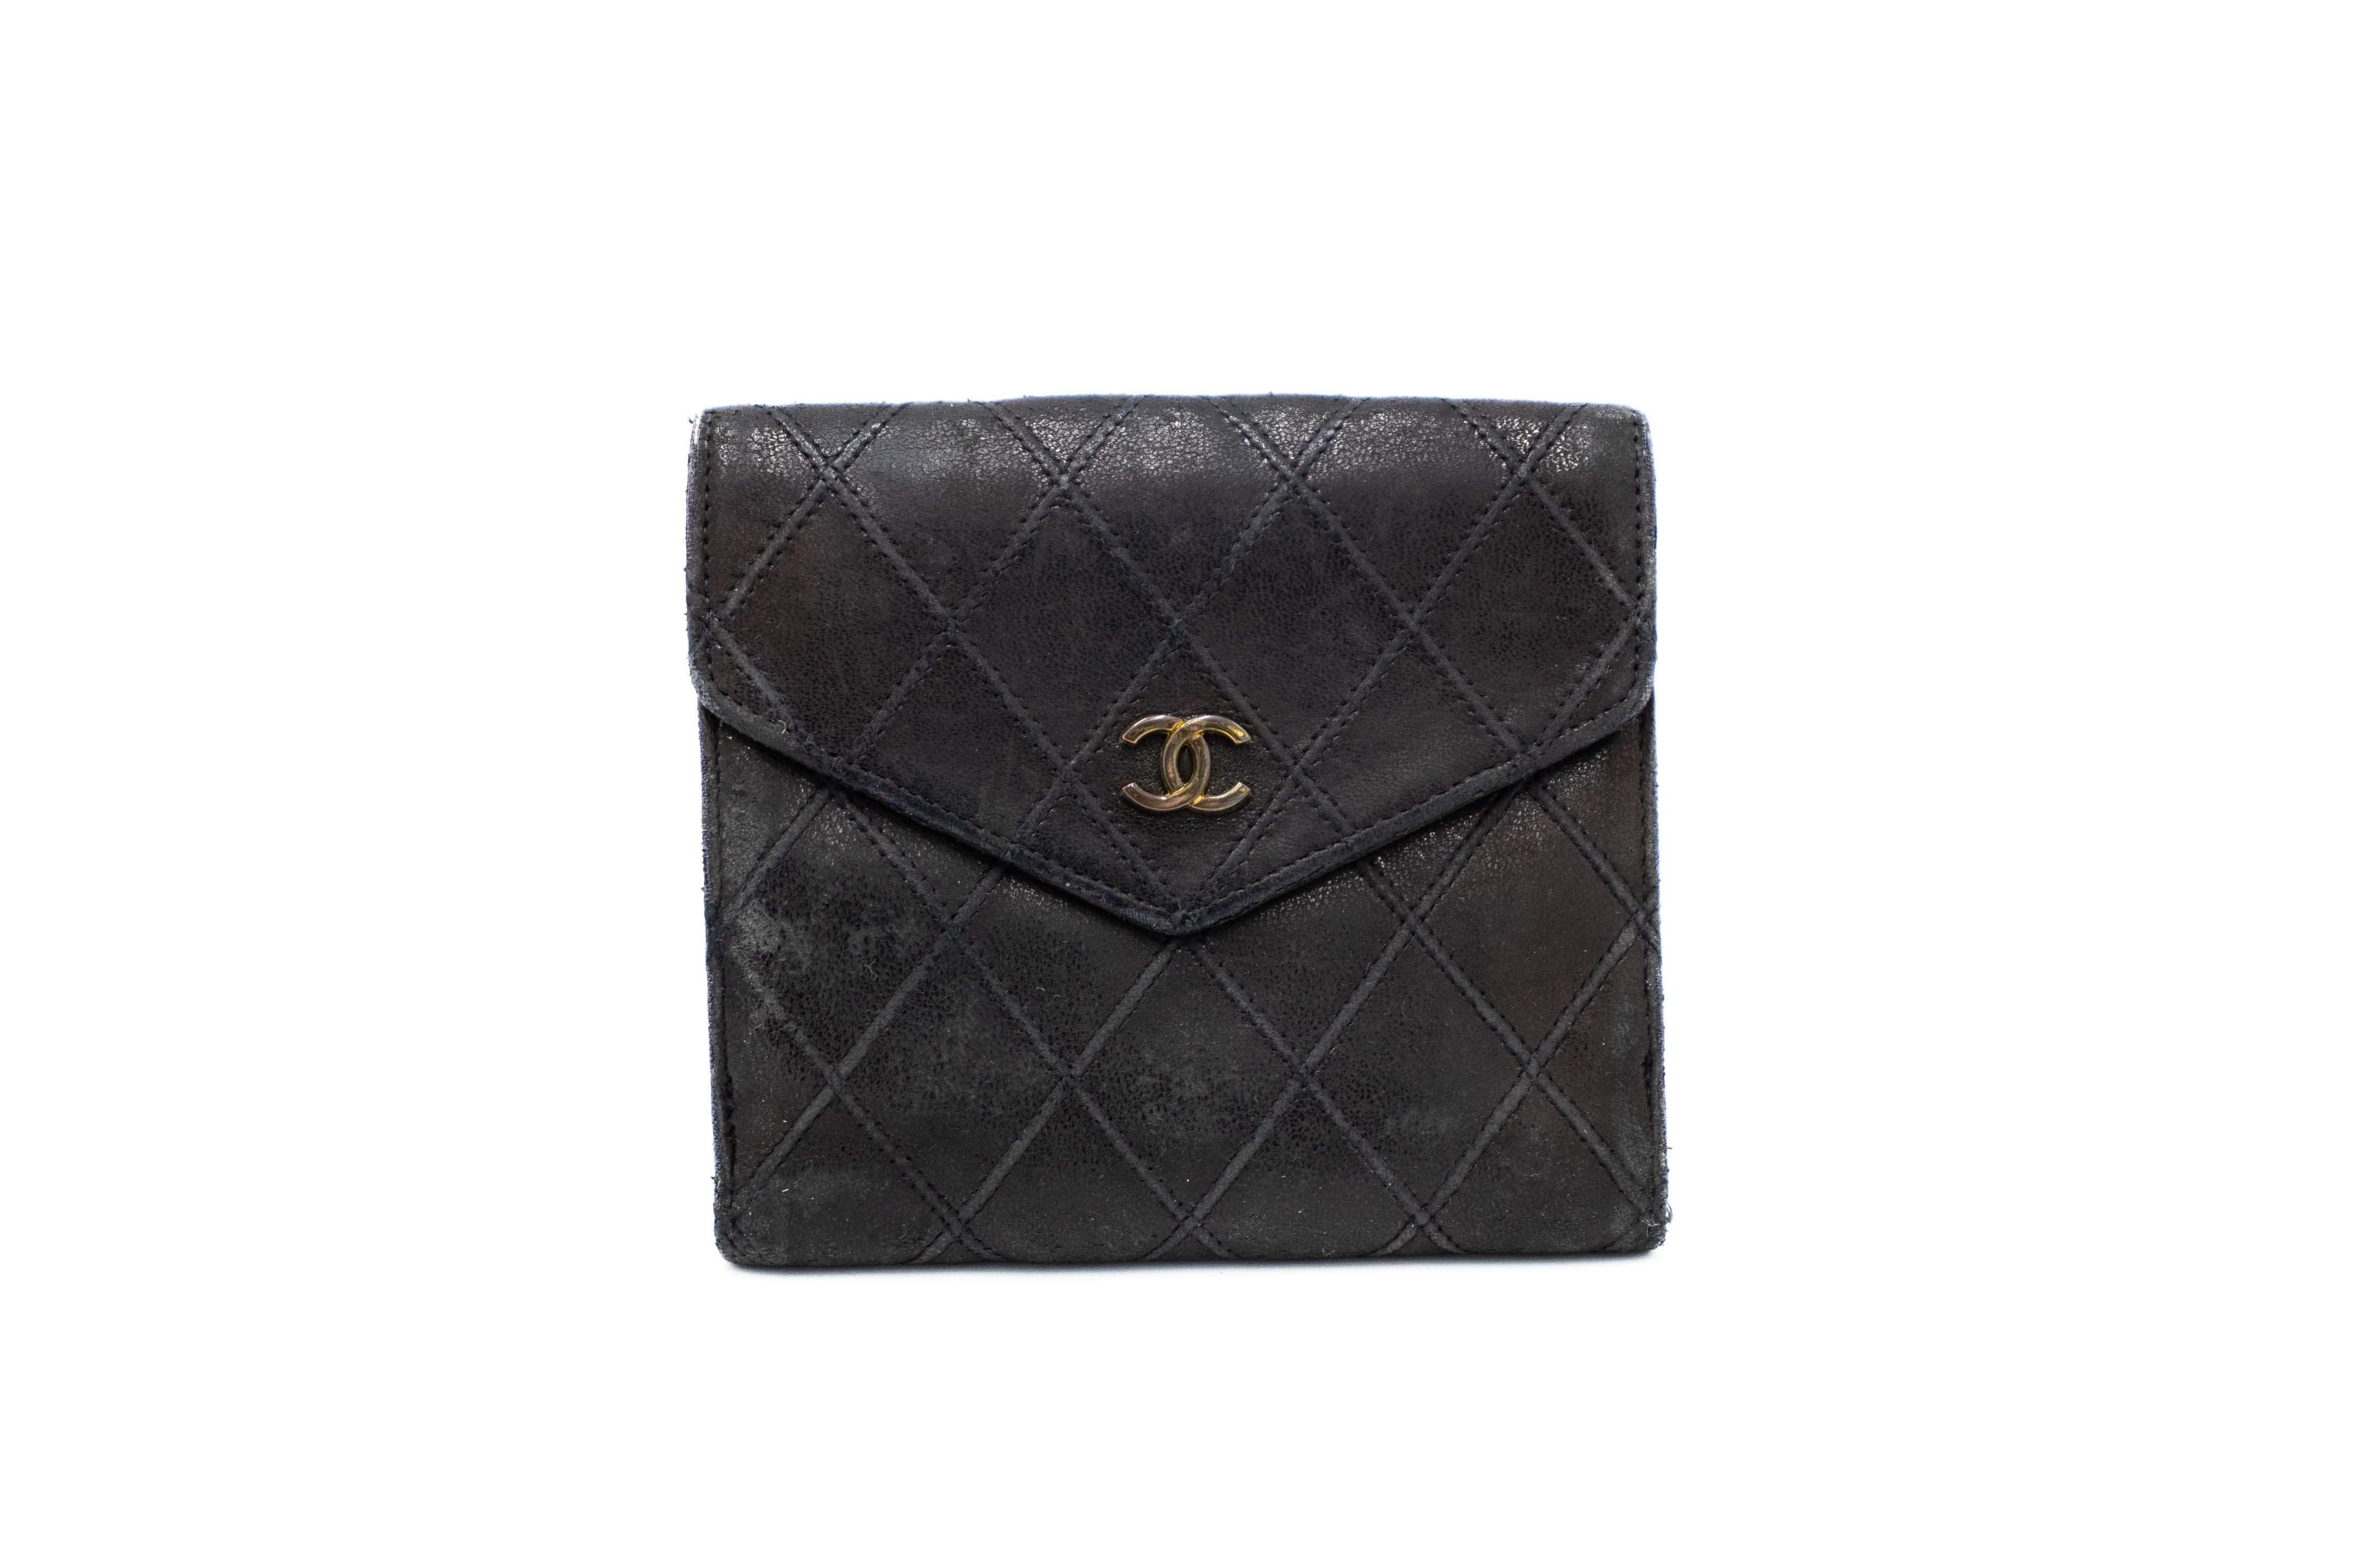 CHANEL QUILTED BI-FOLD EMBOSSED LOGO WALLET